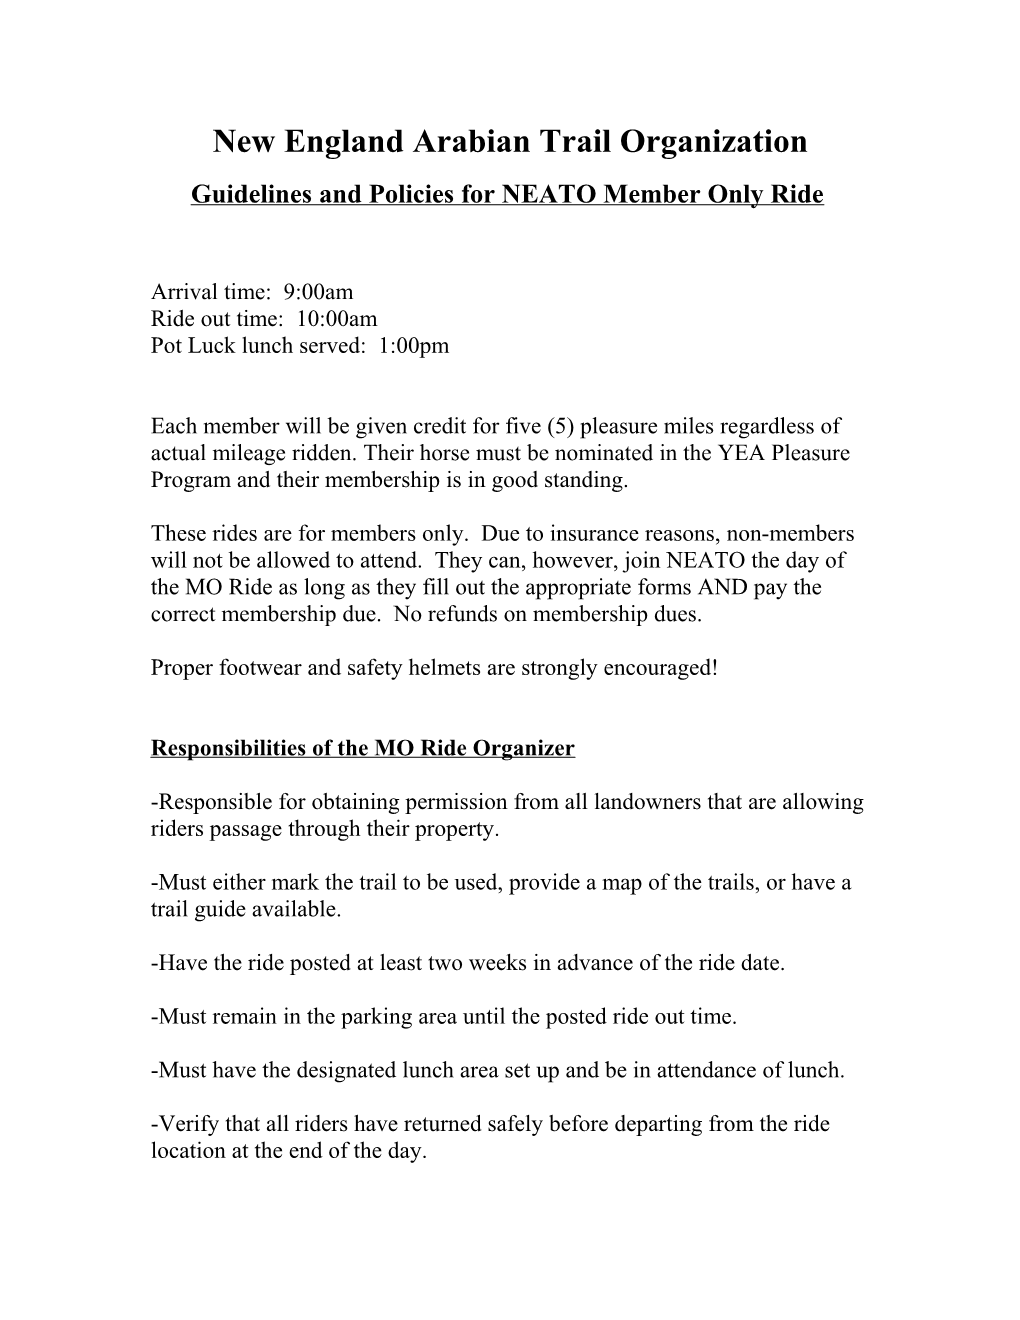 Guidelines for NEATO Member Only Rides